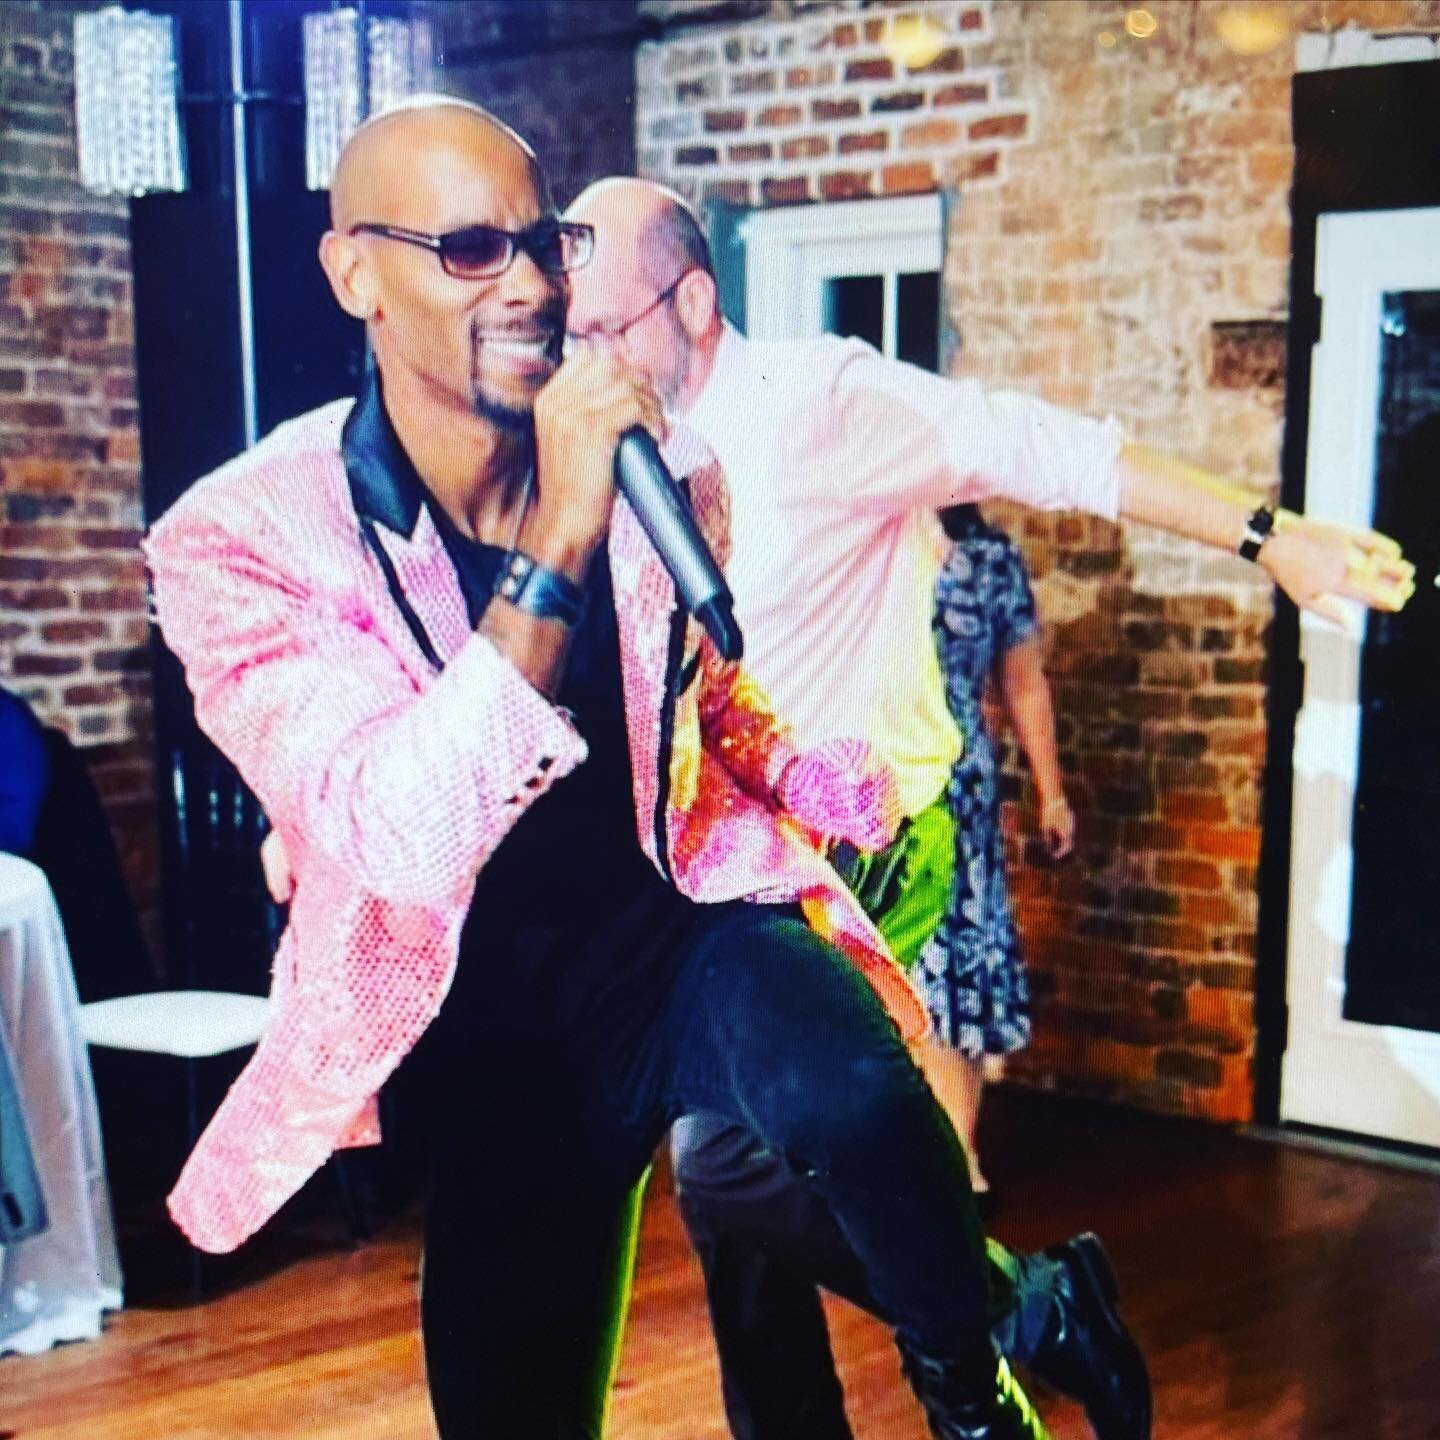 Happy Birthday to one of our best DJ/MC/Entertainers Estebon aka DJ 3!! You will always see his moves &amp; infectious personality!! #happybirthday #atlantadjs #1800mediagroup